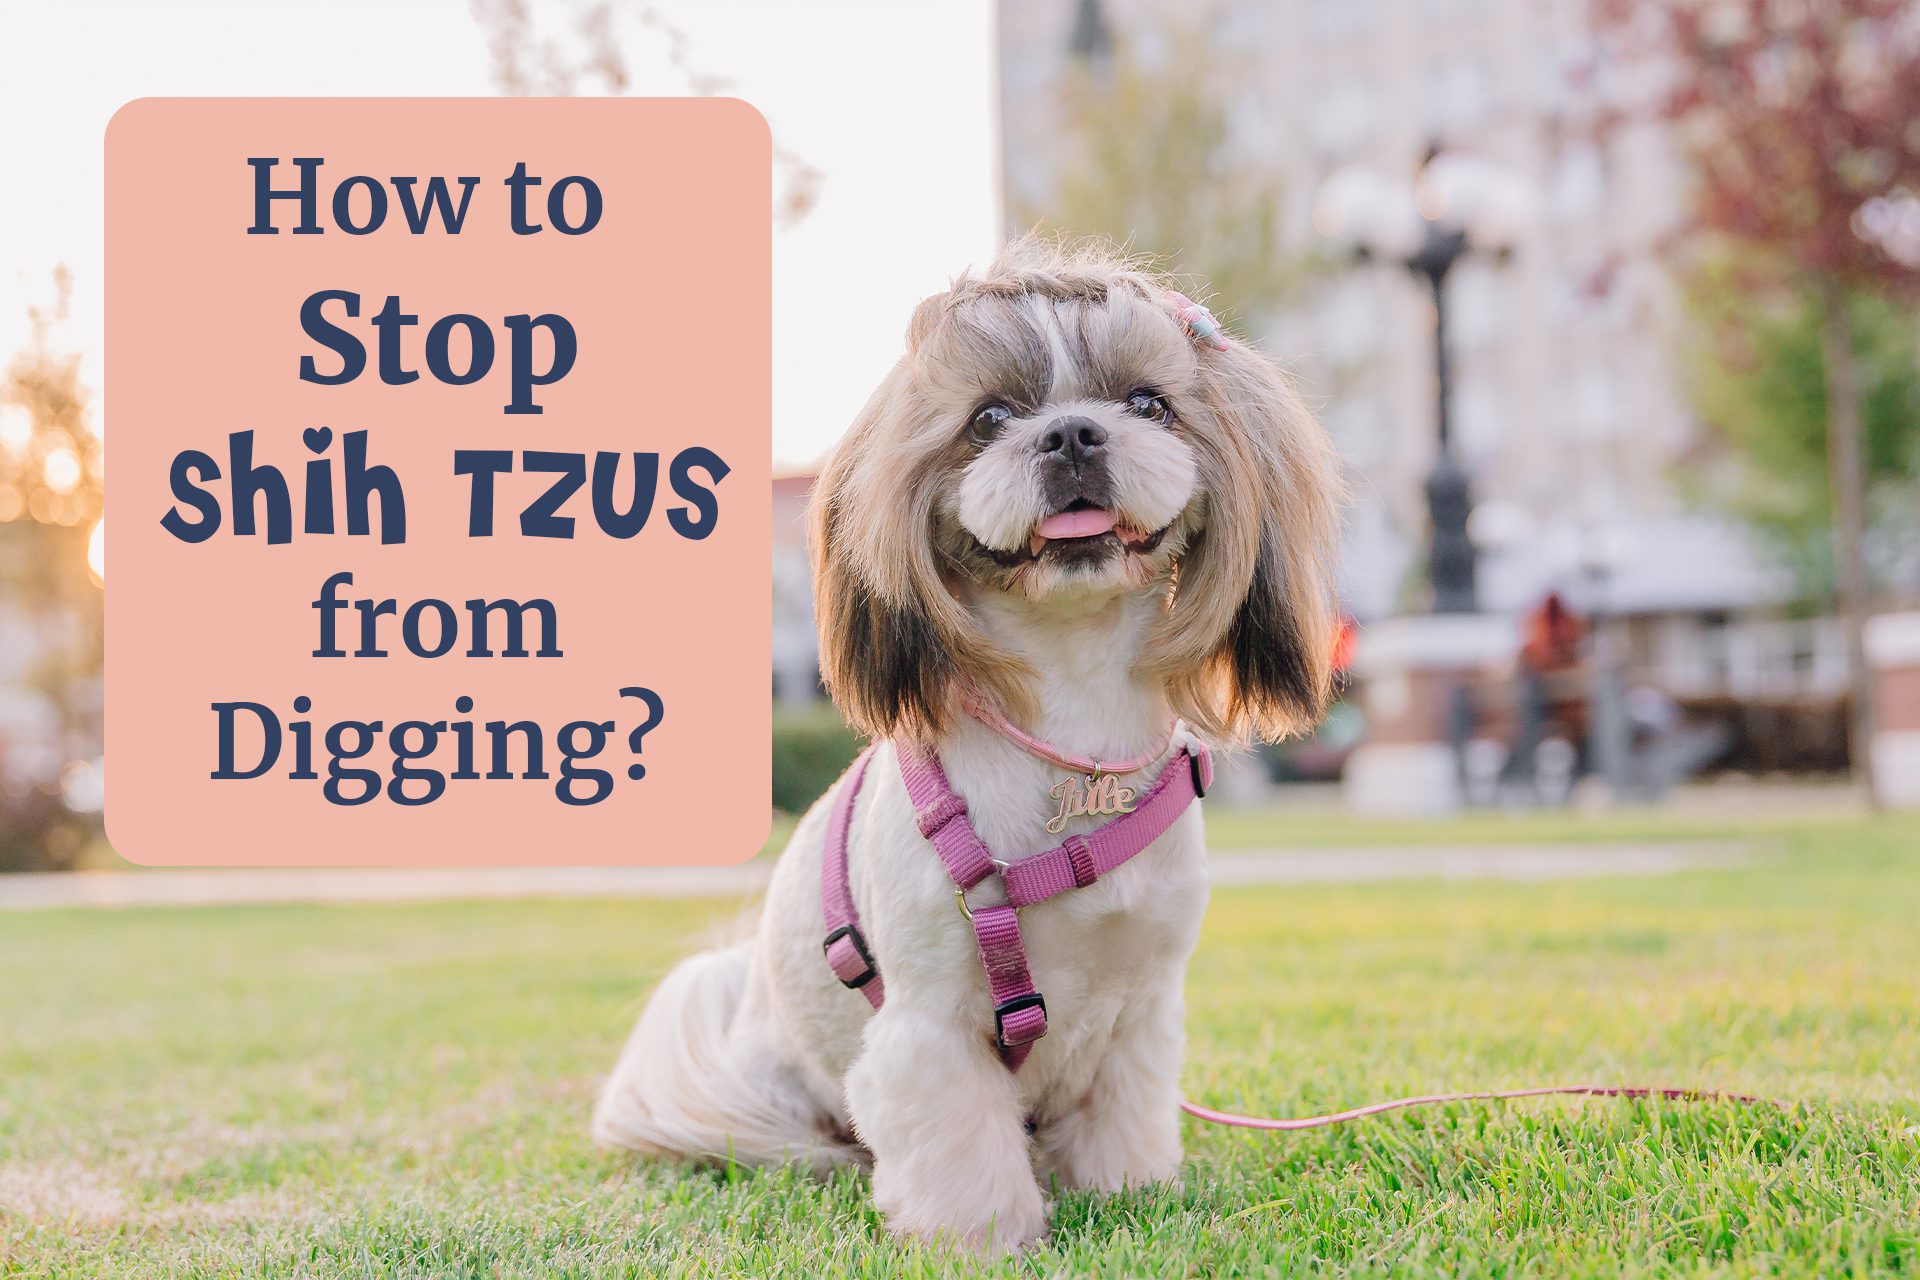 How to stop Shih Tzu from digging? There are several possible ways to stop Shih Tzu from digging by proper training.